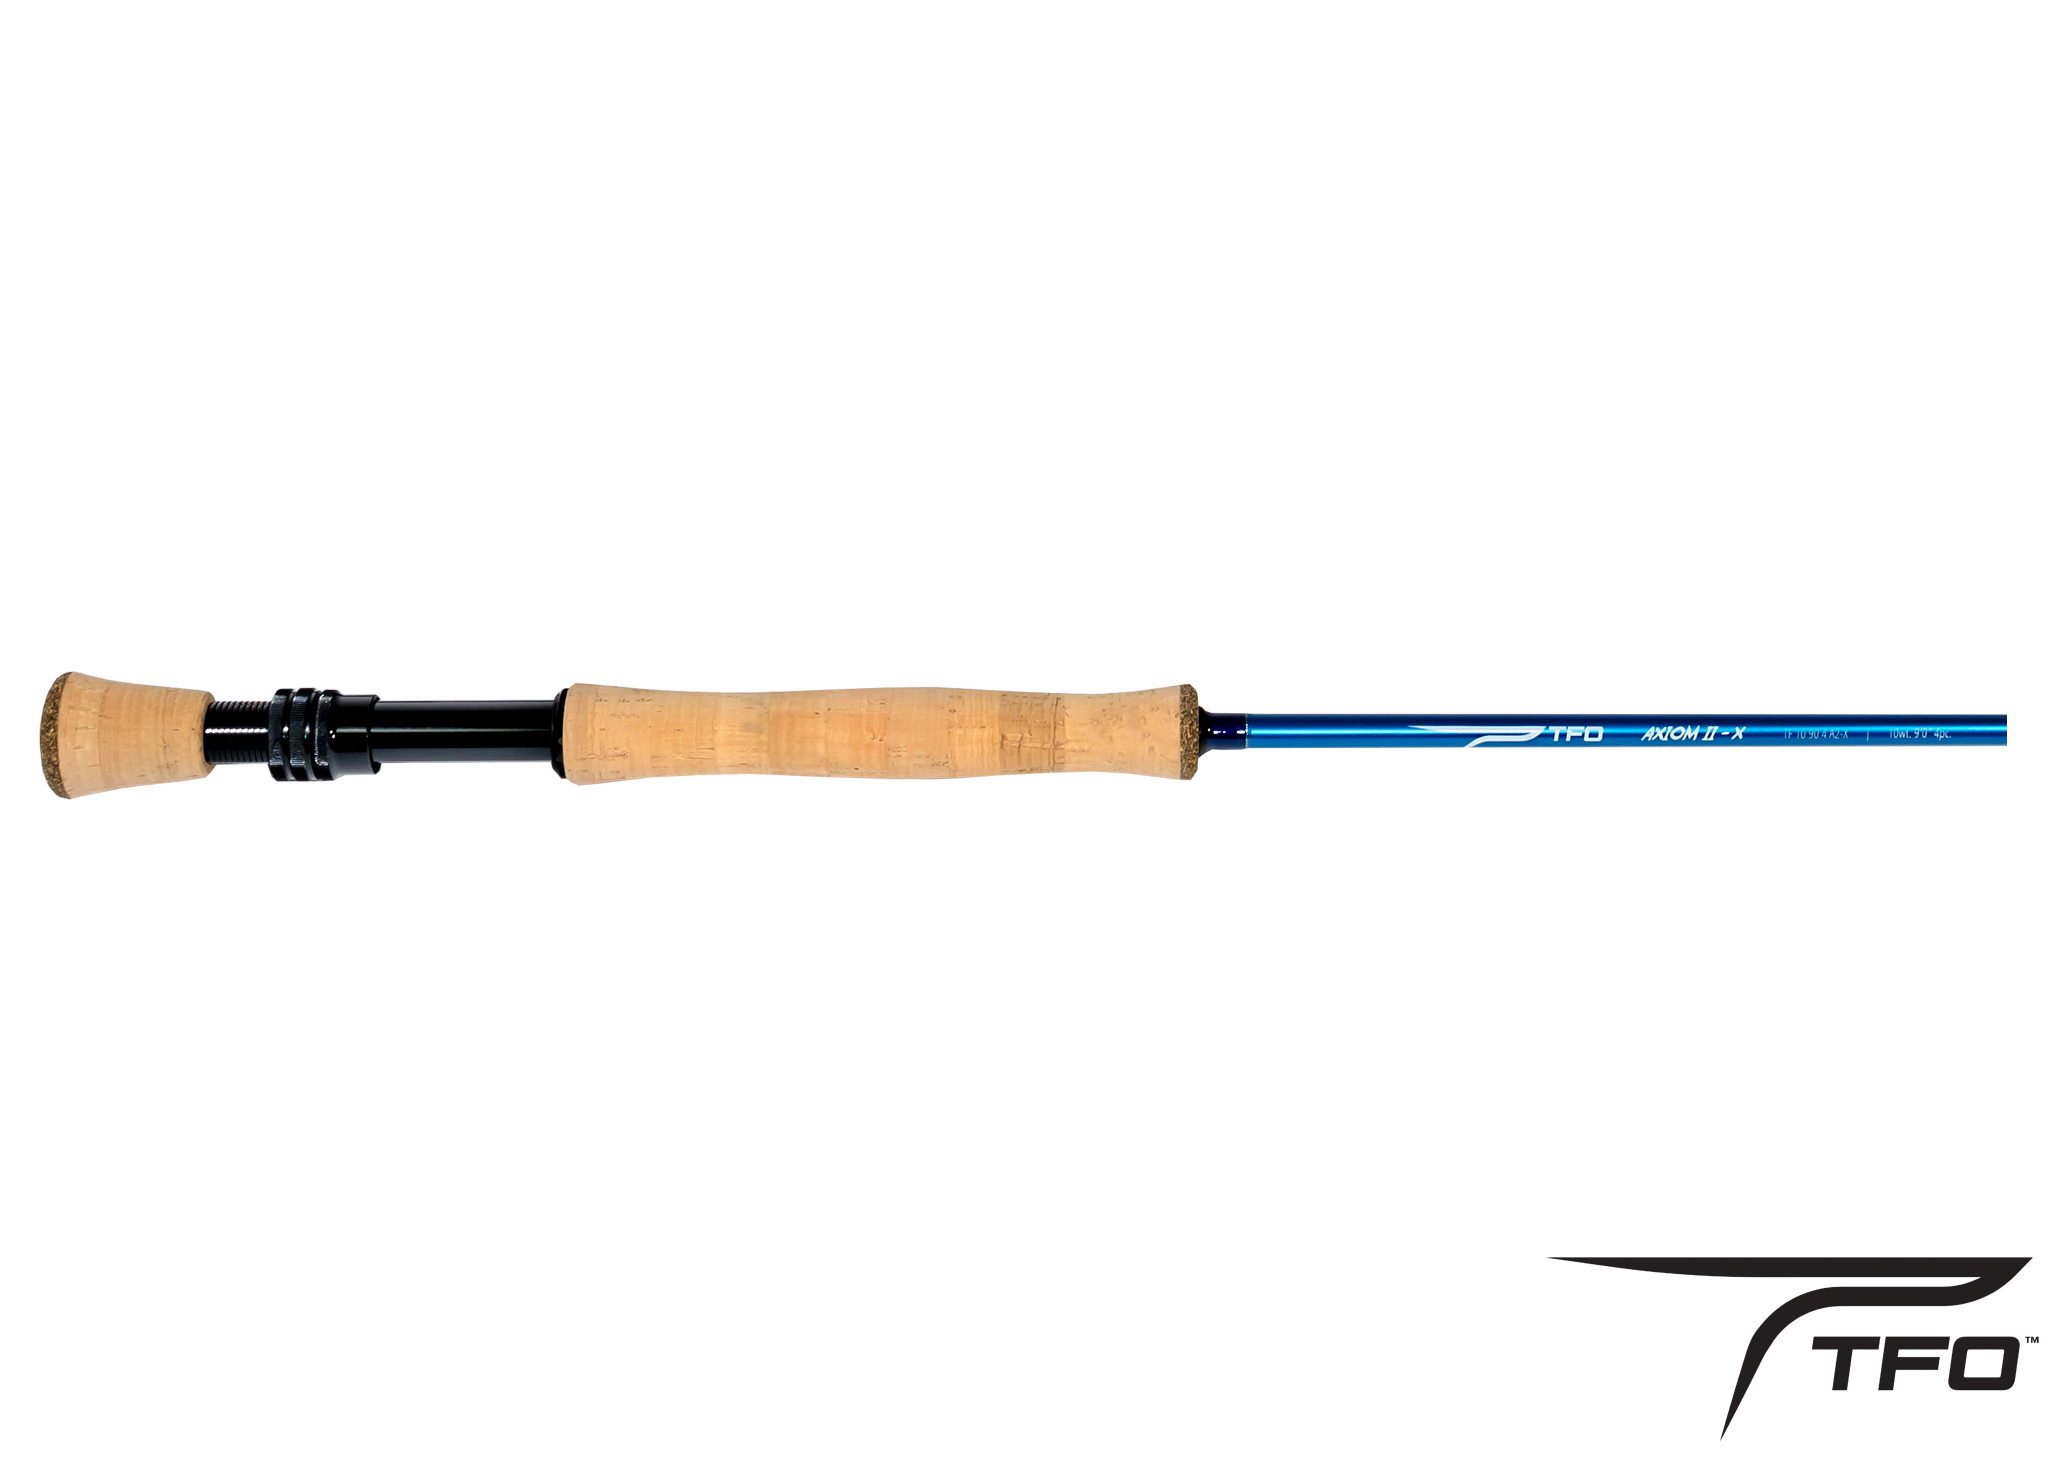 TFO Rods on X: Sunshine and striped lines. Making the most of